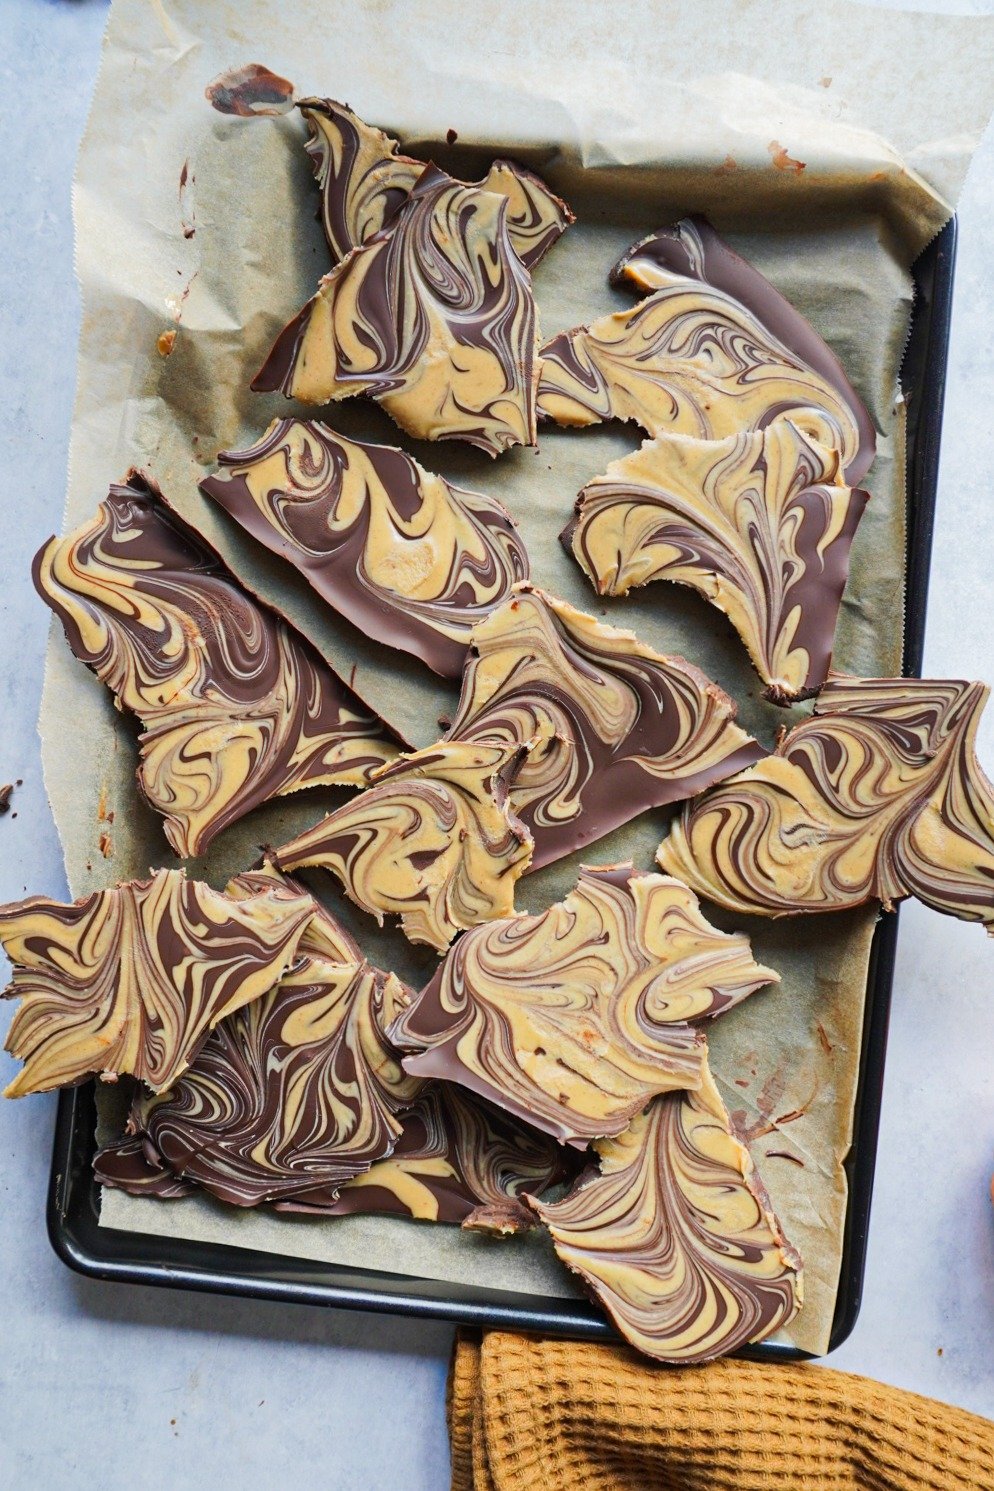 Easy To Make Homemade Chocolate Bark is the perfect gift to add.